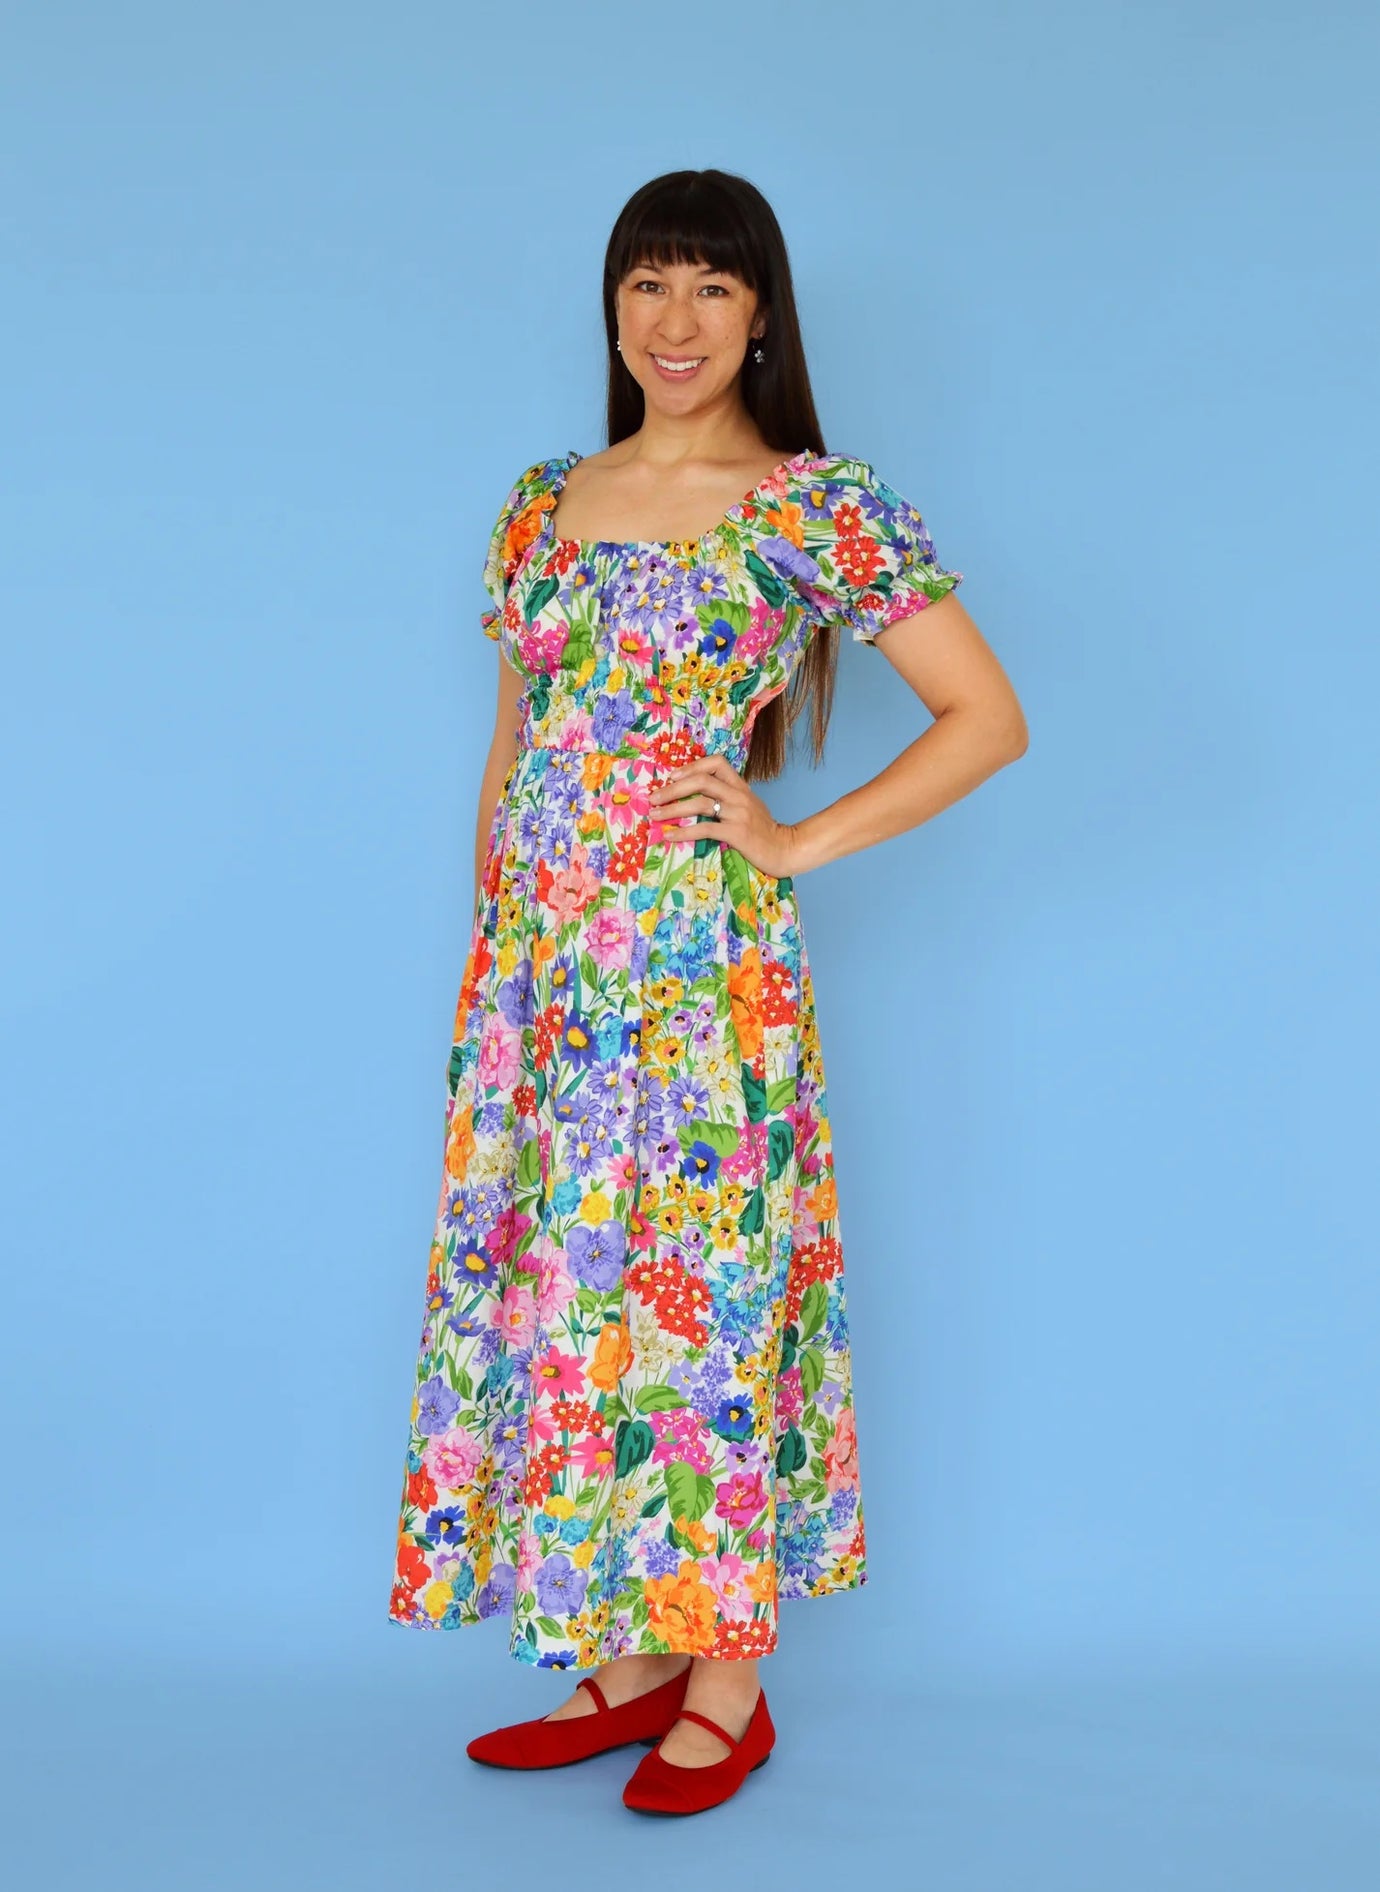 Woman wearing the Holland Park Dress sewing pattern from Nina Lee on The Fold Line. A dress pattern made in cotton lawn, lightweight linen, or rayon fabric, featuring a gathered neckline, short gathered sleeves, elastic waist, and maxi length.